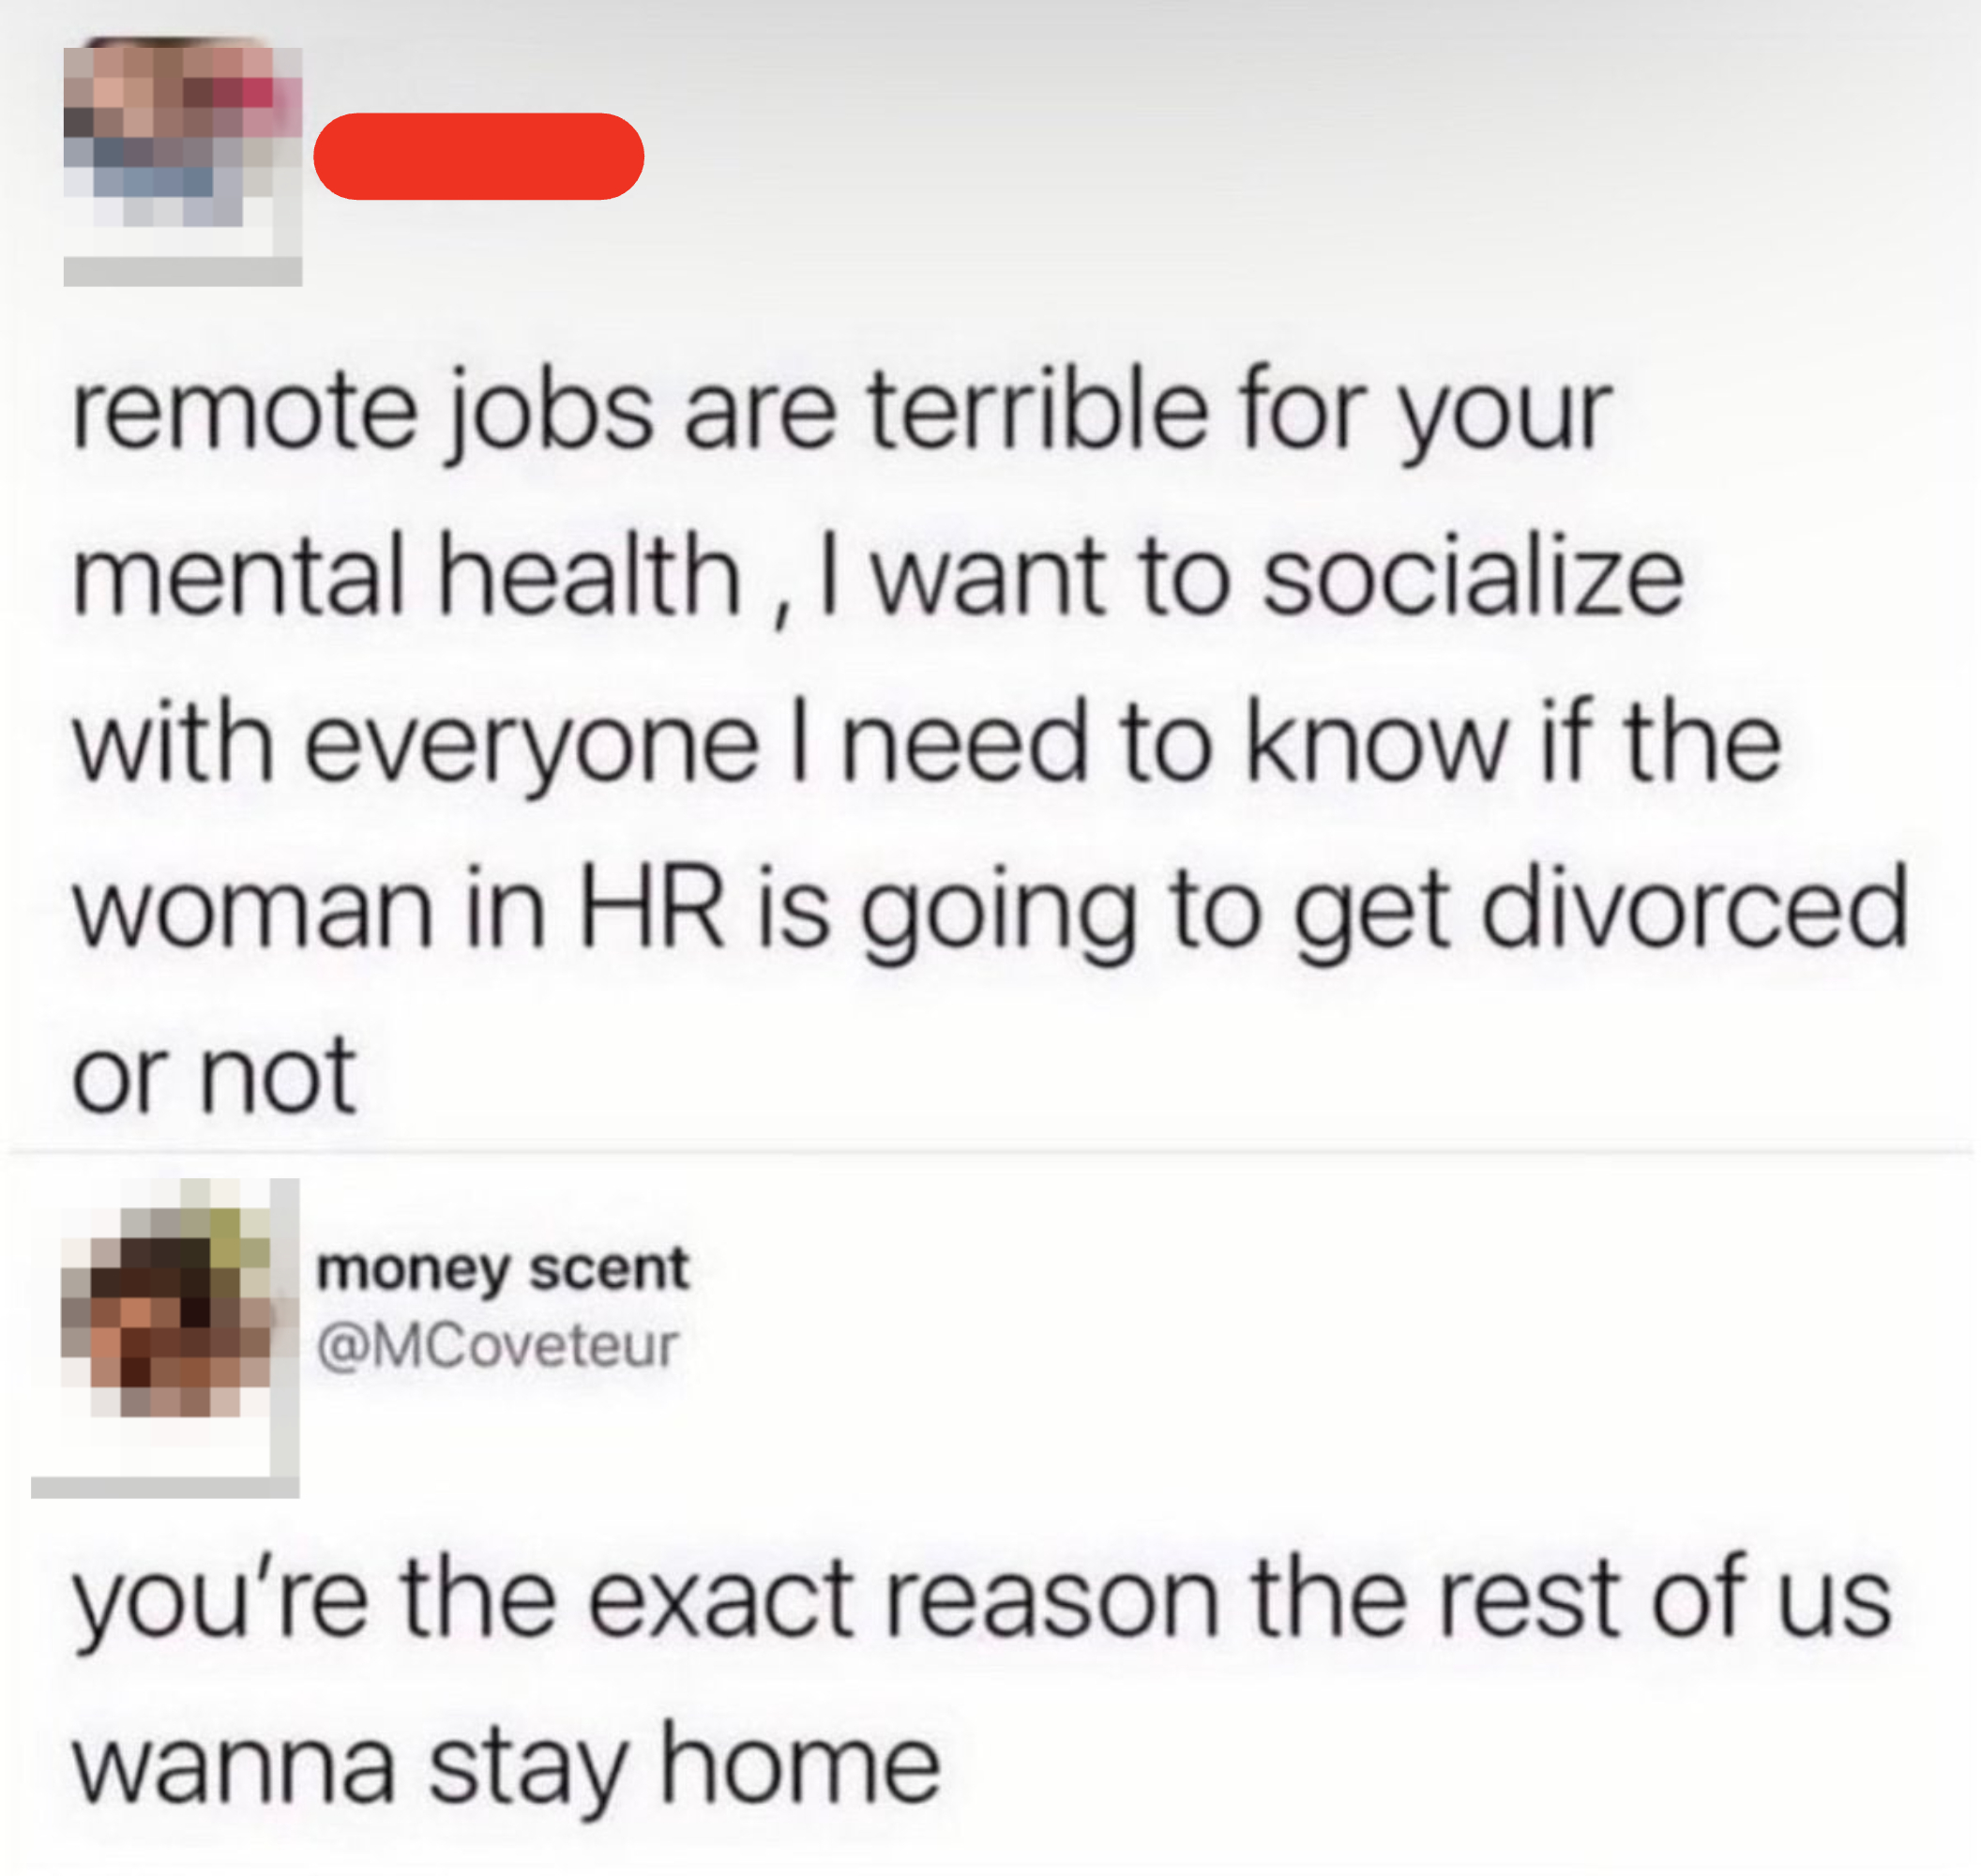 &quot;remote jobs are terrible for your mental health, I want to socialize with everyone I need to know if the woman in HR is going ito get divorced&quot;; response: &quot;you&#x27;re the exact reason the rest of us wanna stay home&quot;